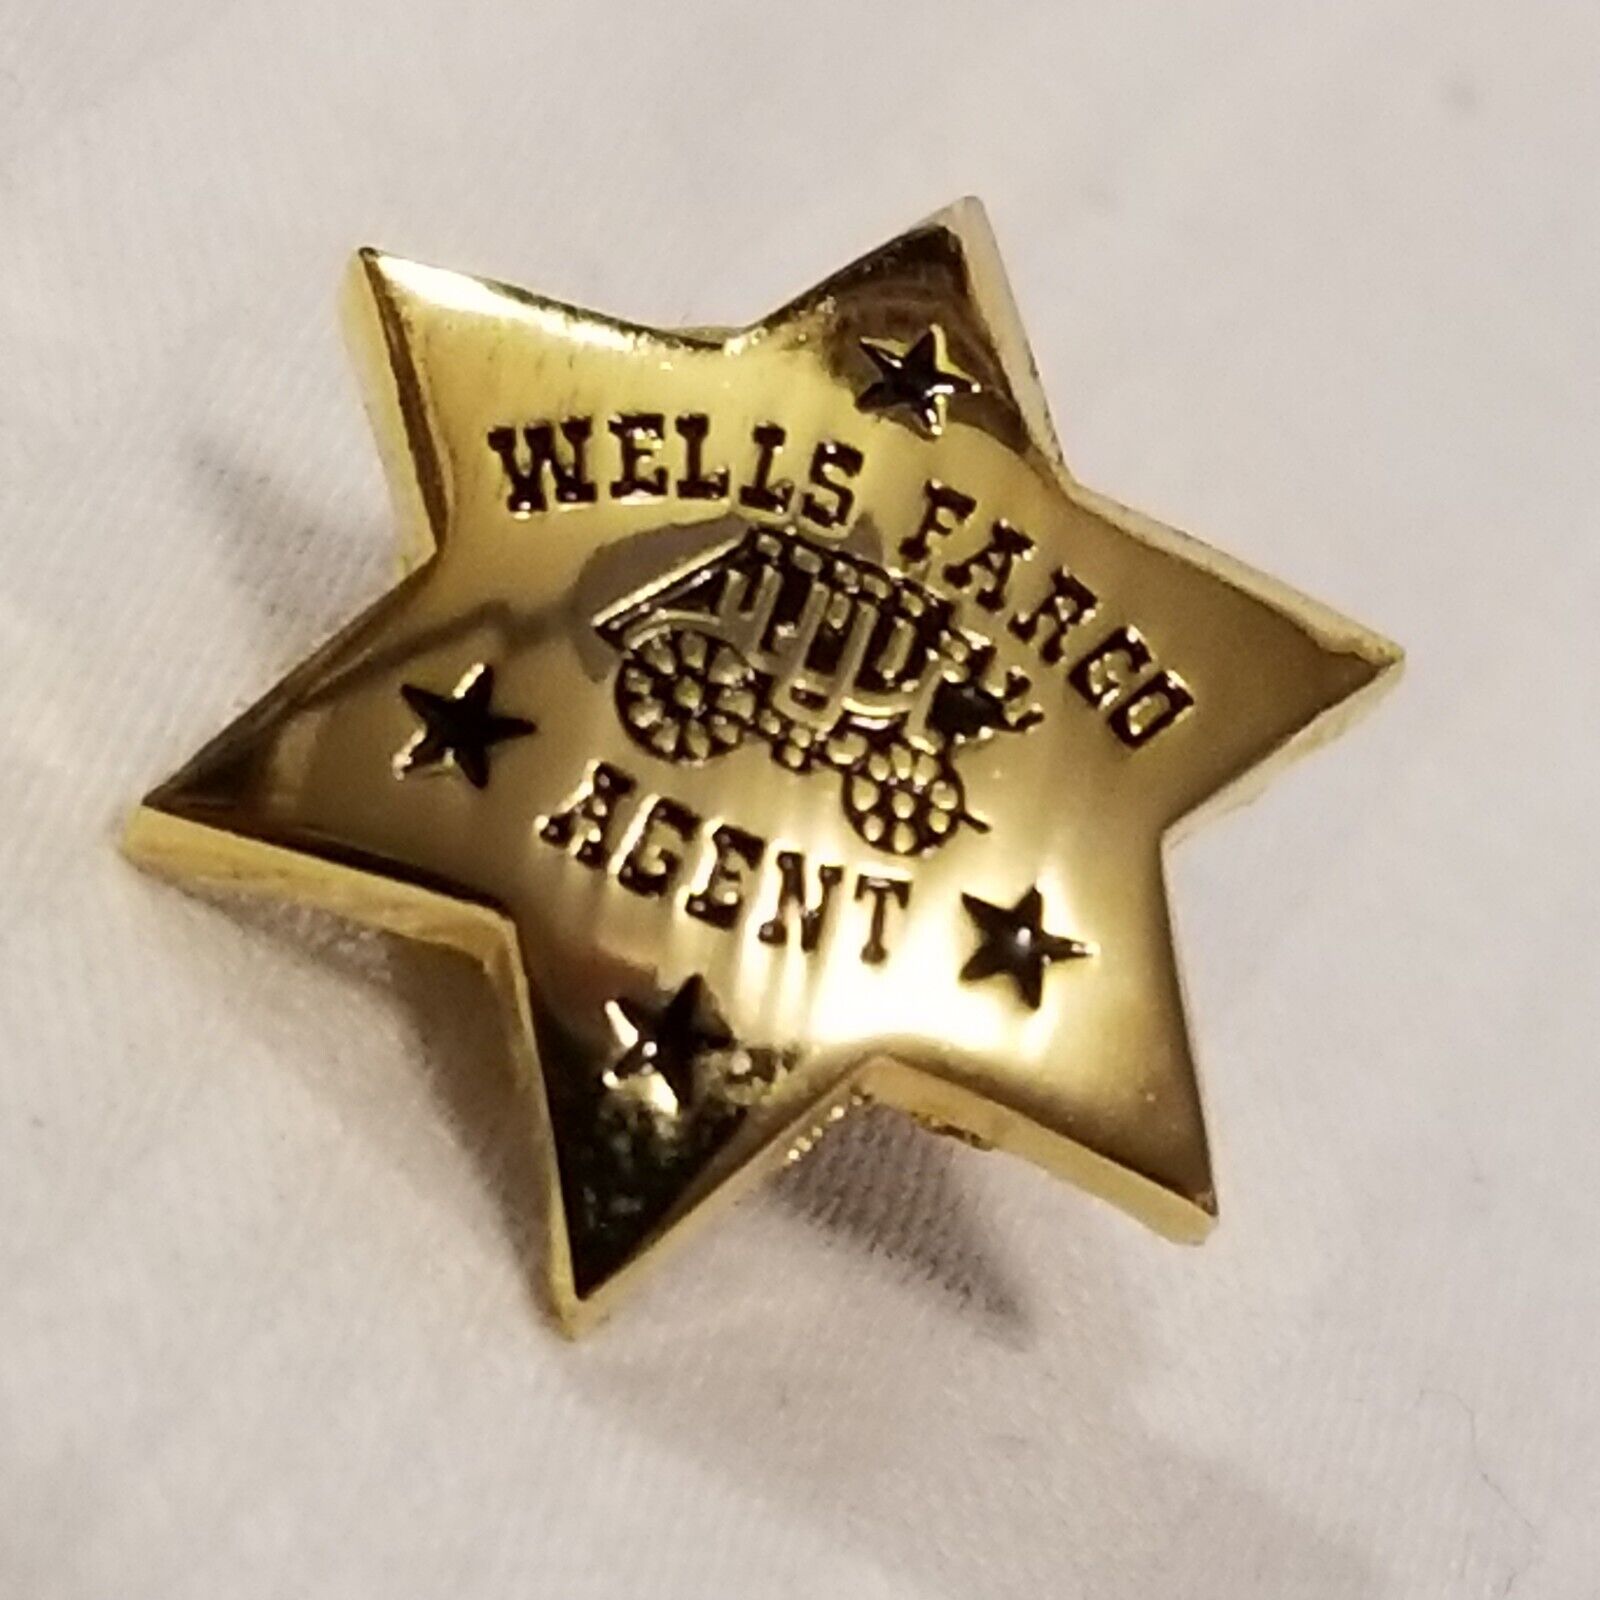 Wells Fargo Agent Star Badge Old West Tie Tack Lapel Pin Back Stagecoach pinback